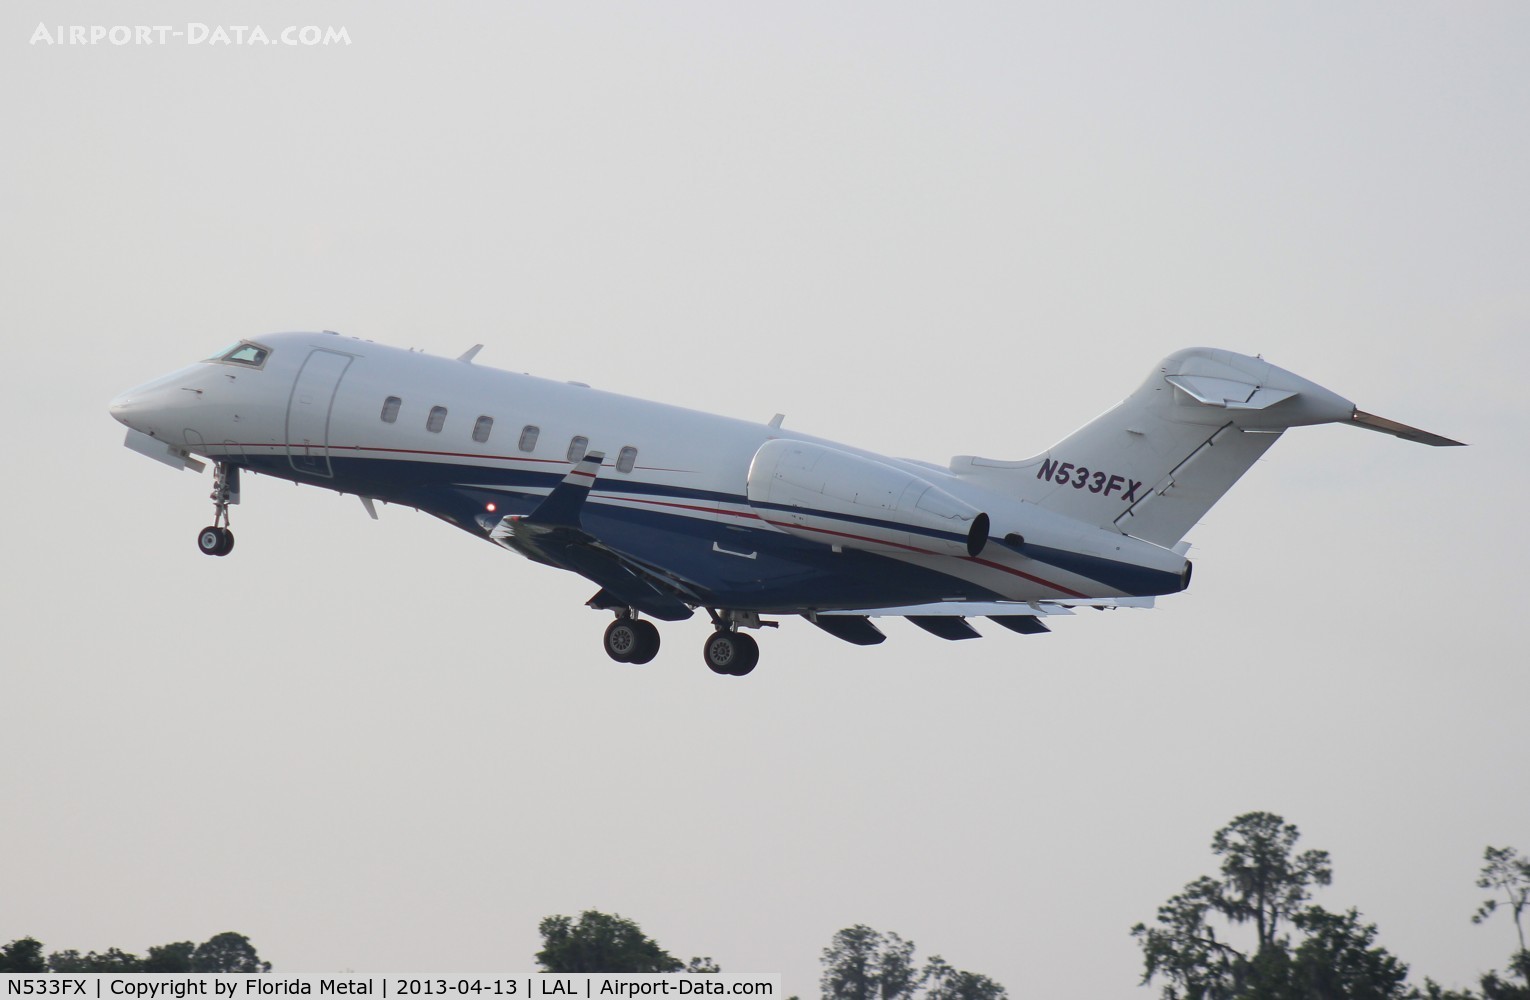 N533FX, 2007 Bombardier Challenger 300 (BD-100-1A10) C/N 20160, Challenger 300